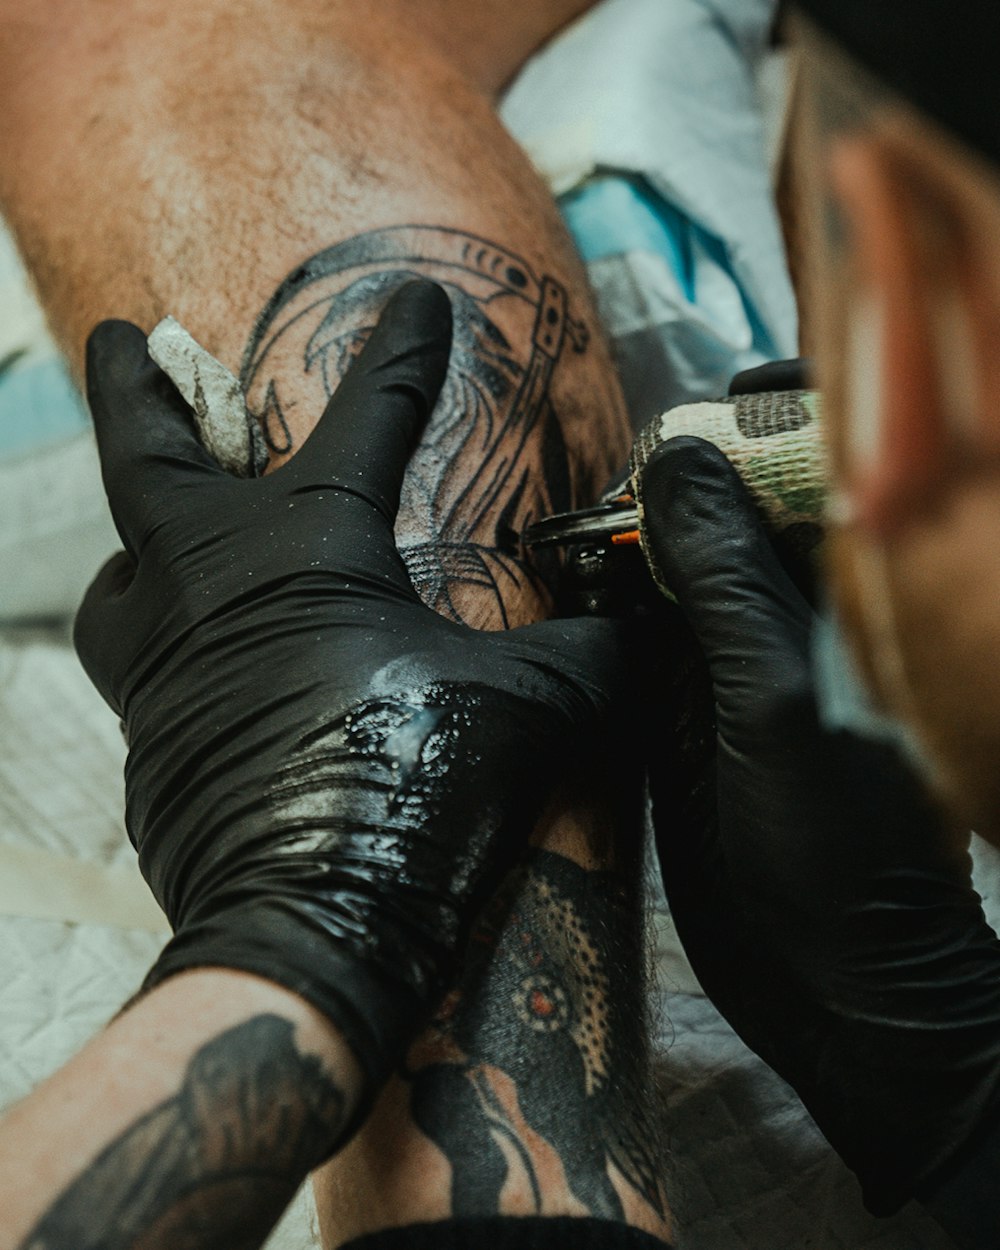 a man getting a tattoo done on his leg